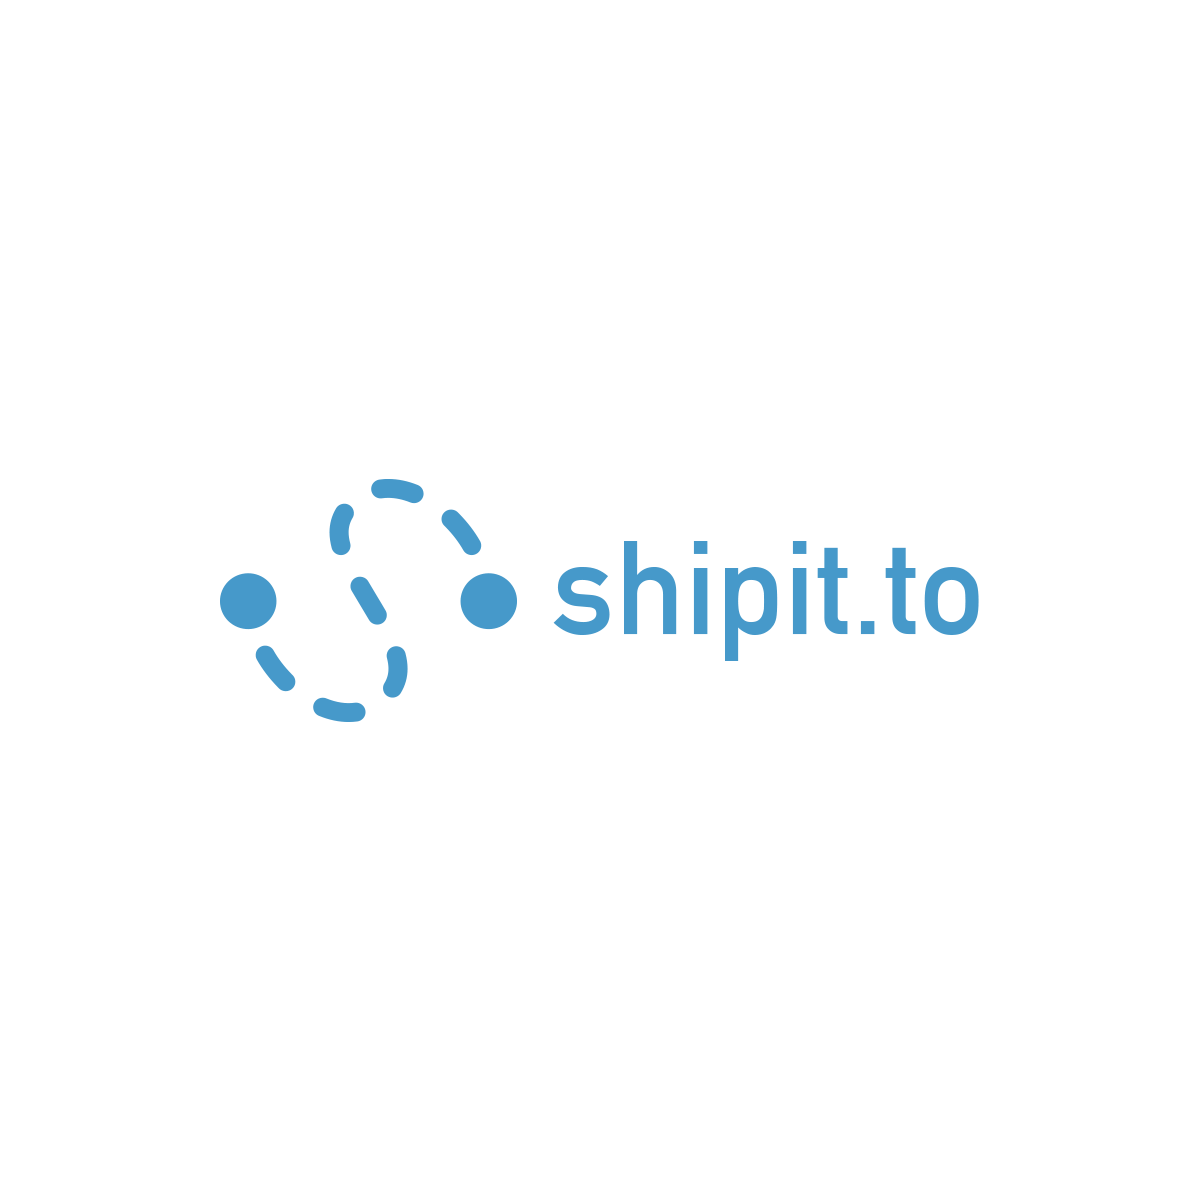 Shipit.to trackers have now been dispatched & analysed across 100 countries